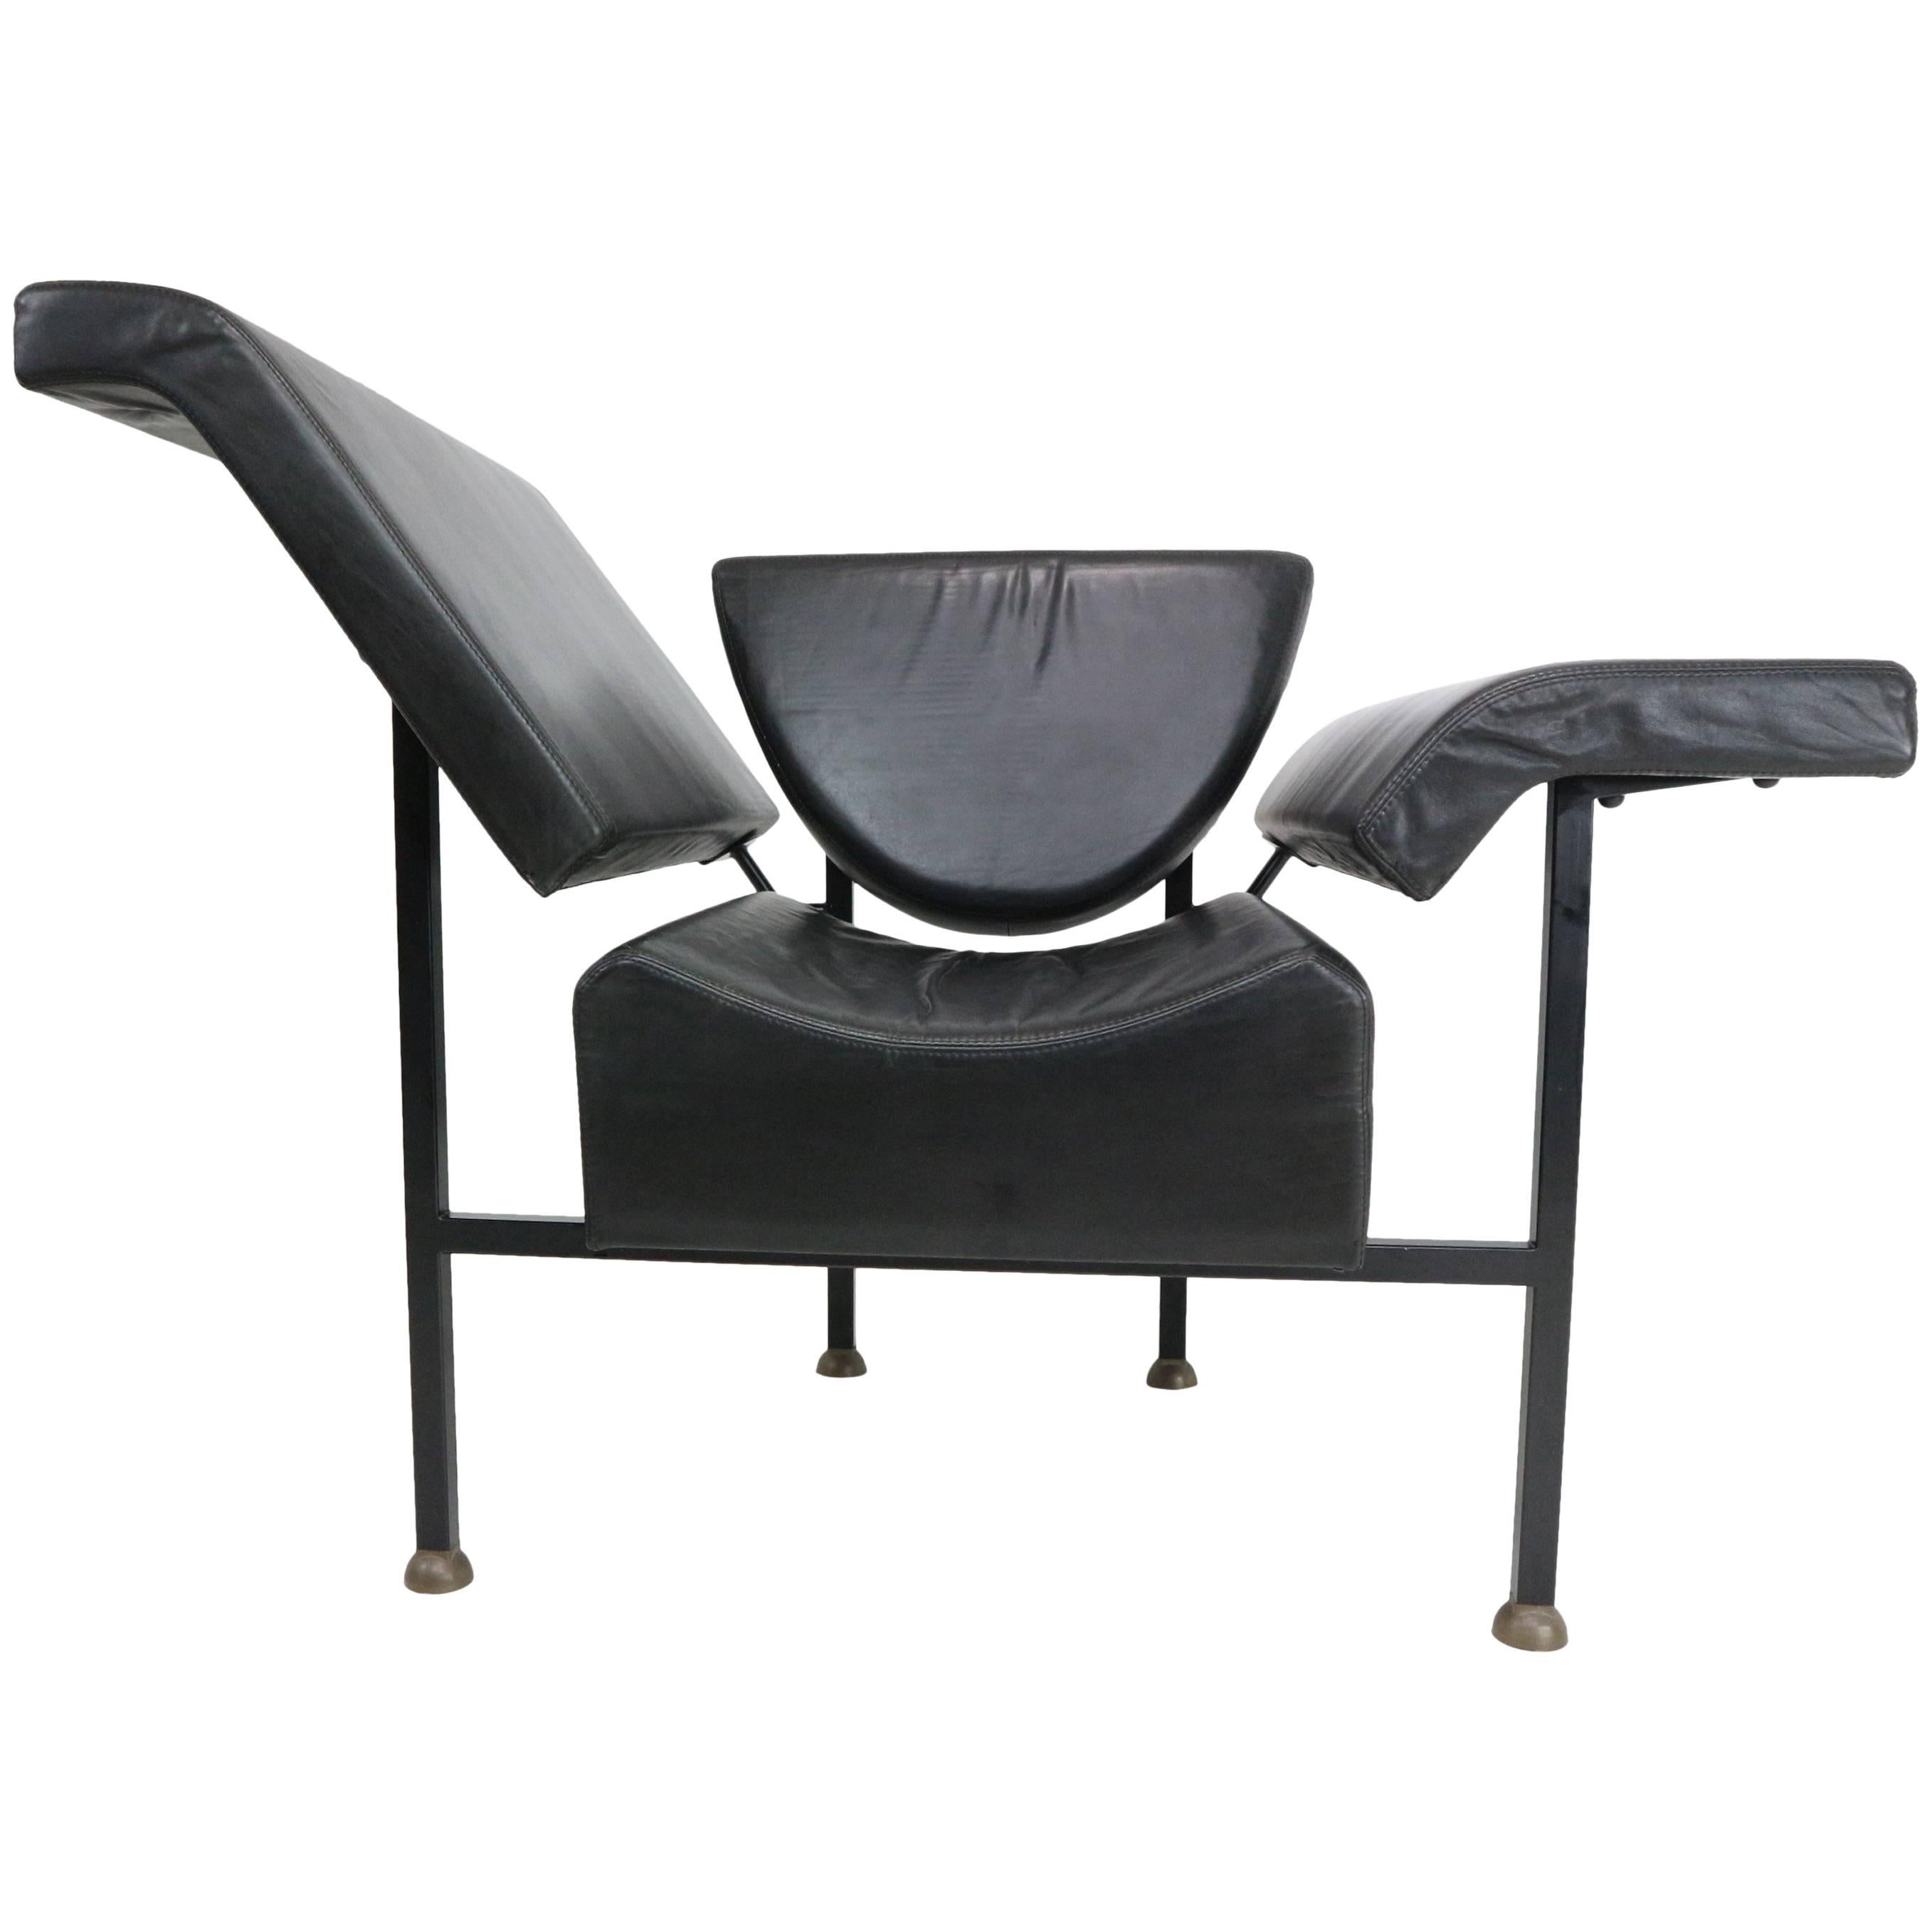 Rob Eckhardt 'Greetings from Holland' Chaise Leather Longue, 1983